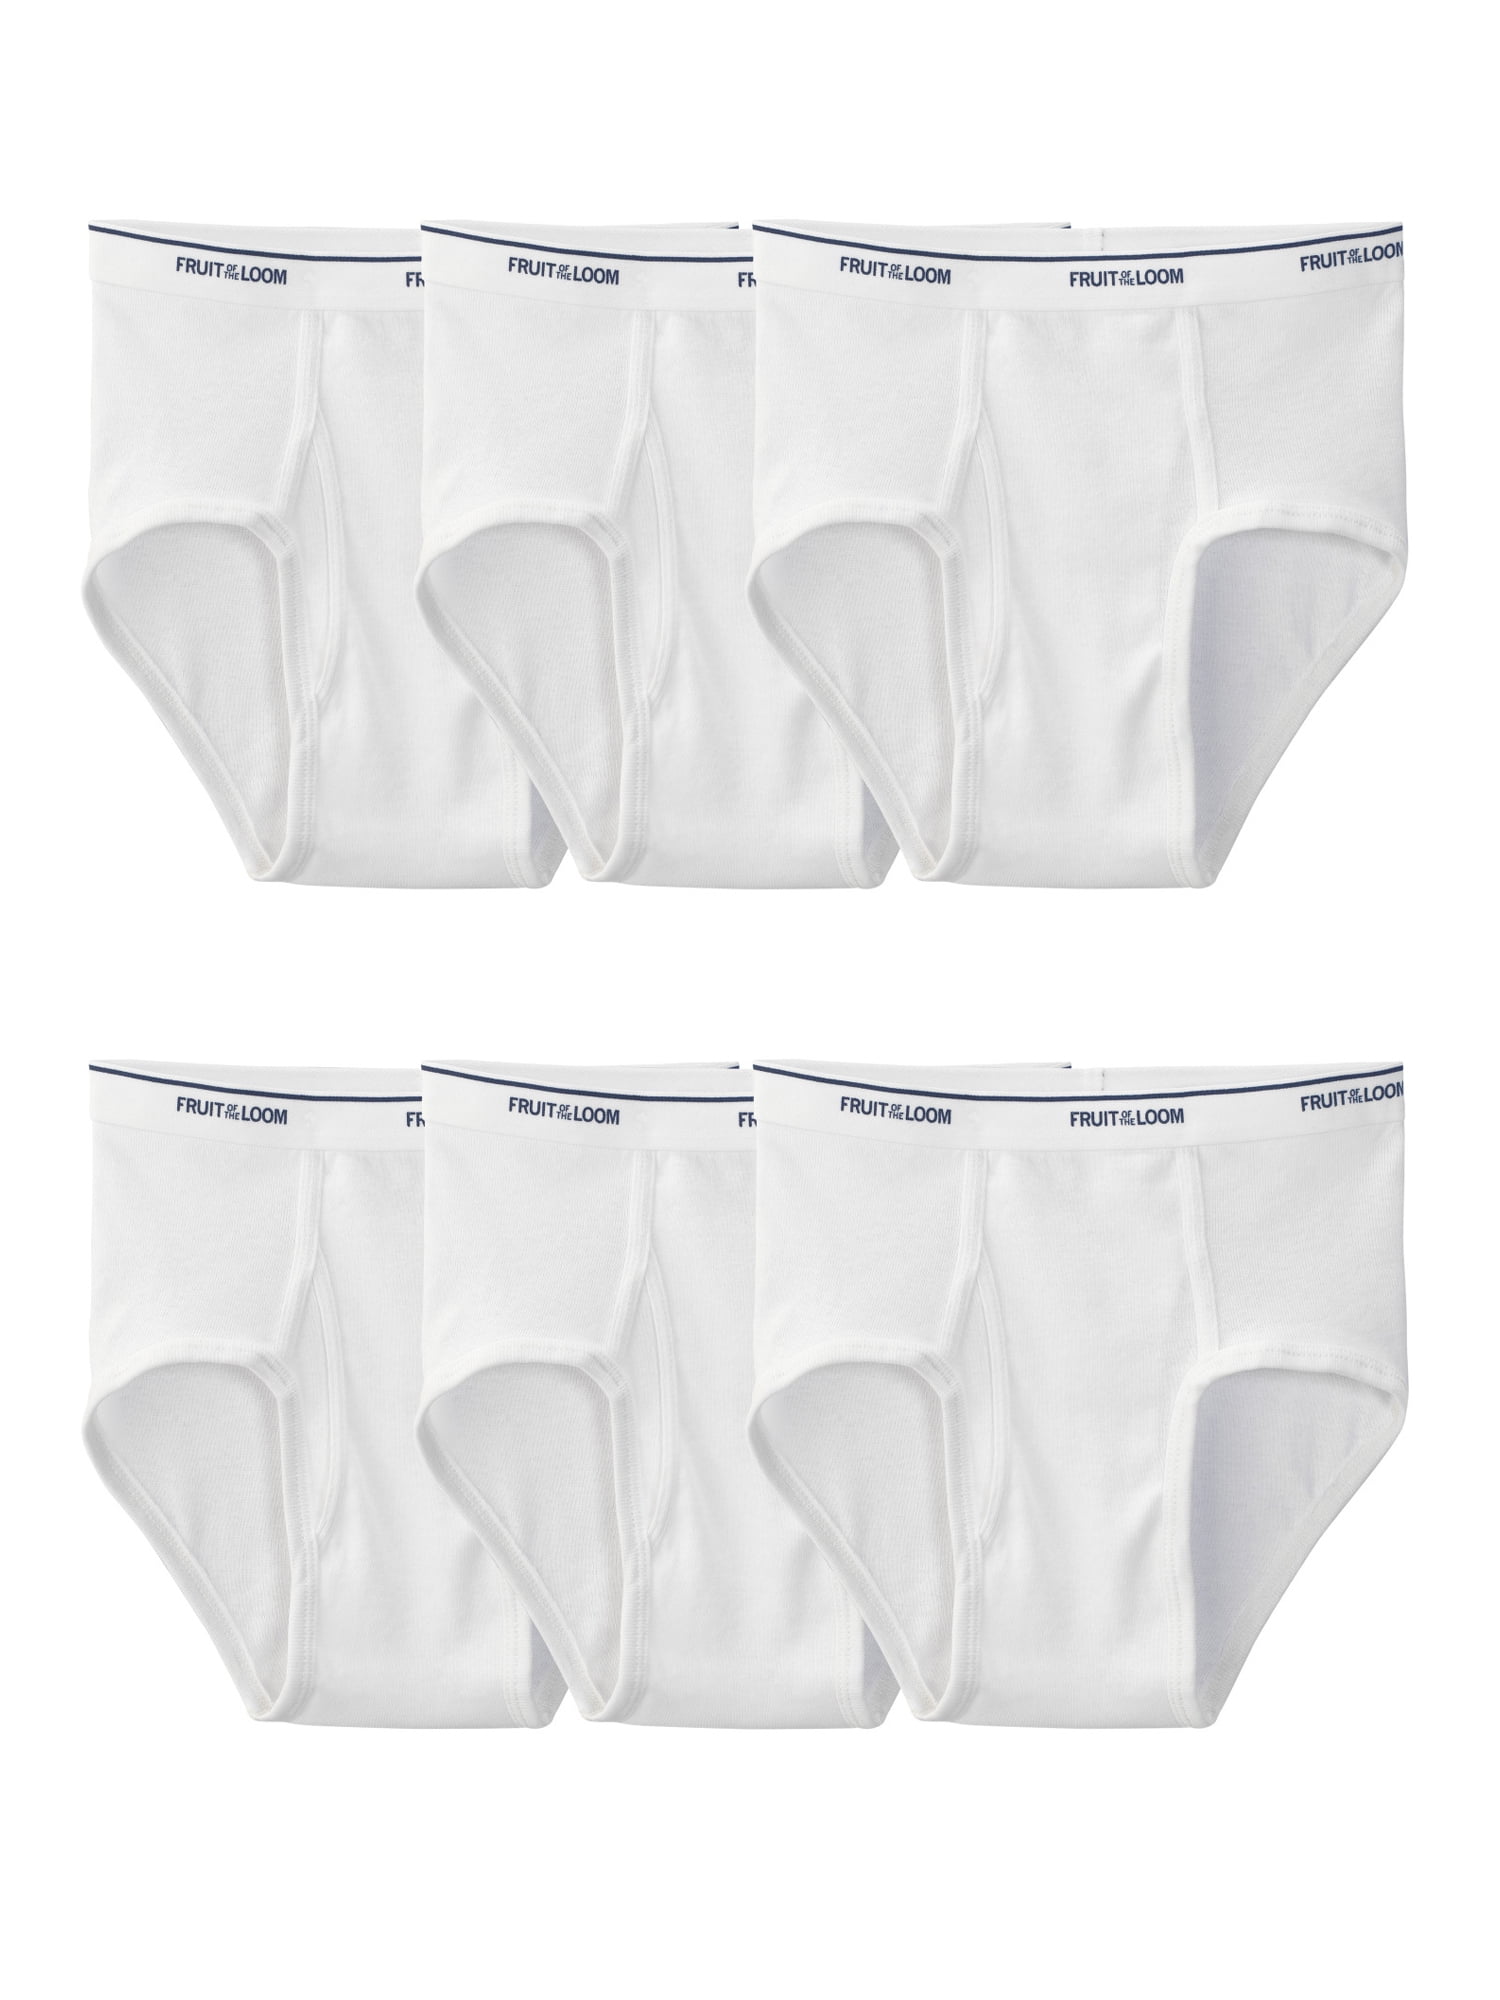 Fruit of the Loom Men's White Briefs - Moisture-Wicking, Comfortable, 6-Pack